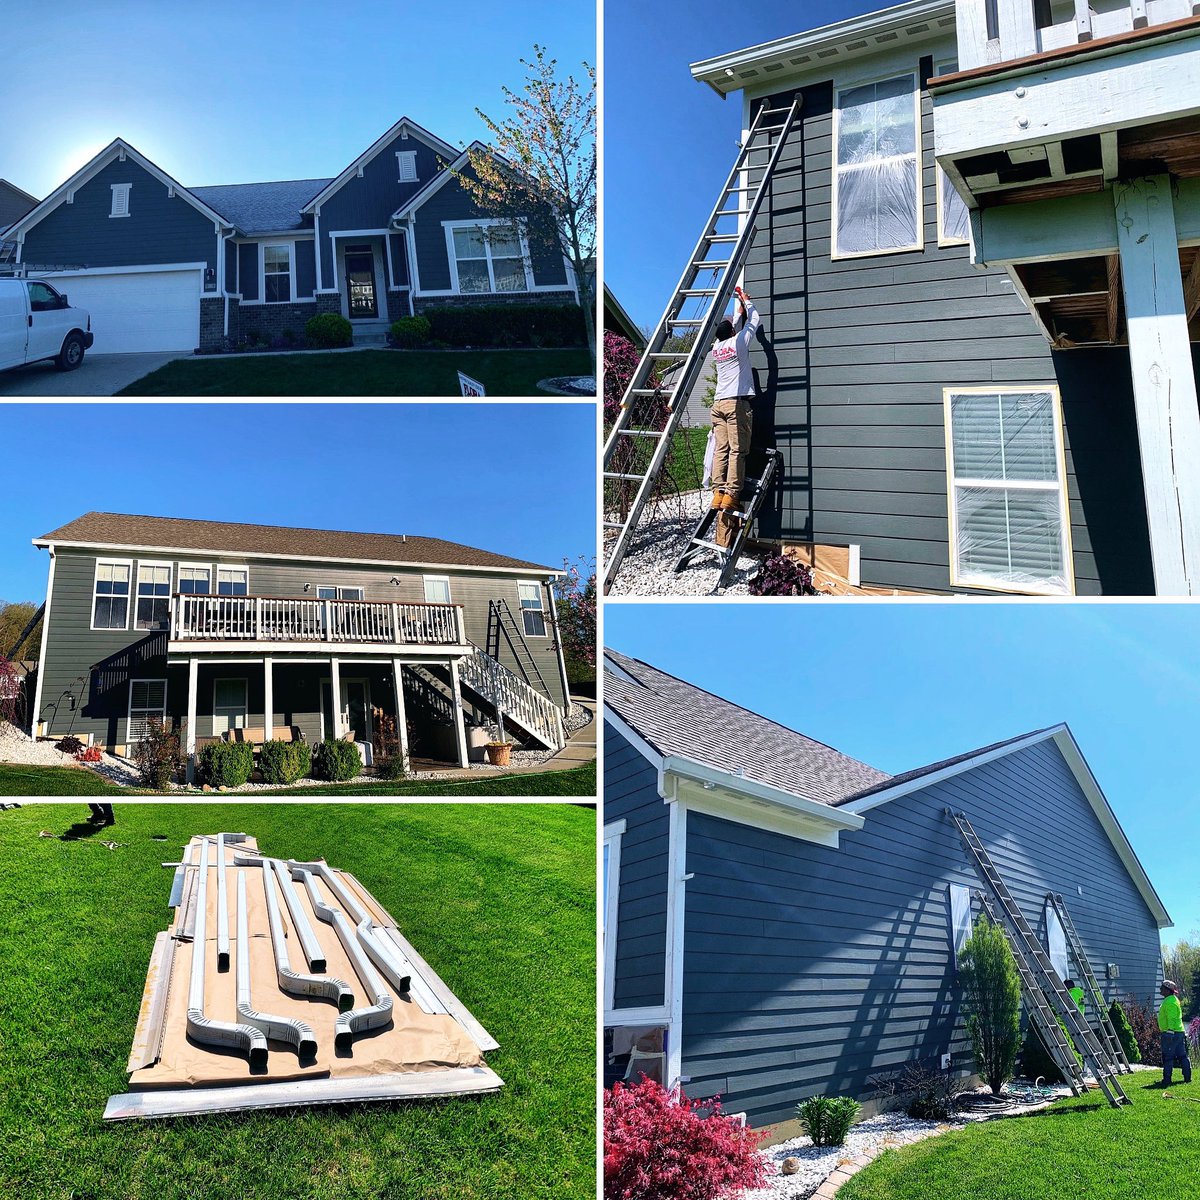 Happy Monday from #DanvilleIndiana! 😎

☎️ 317-447-5227 

#customhome
#exteriorpaintingcontractor #exteriordesign #ppg #ppgpaints #ppgproud #propertymanagement #indysbestpainter #indianapolis #avon #plainfield #hendrickscounty #greenwoodindiana #exteriorpainting #teamfbp